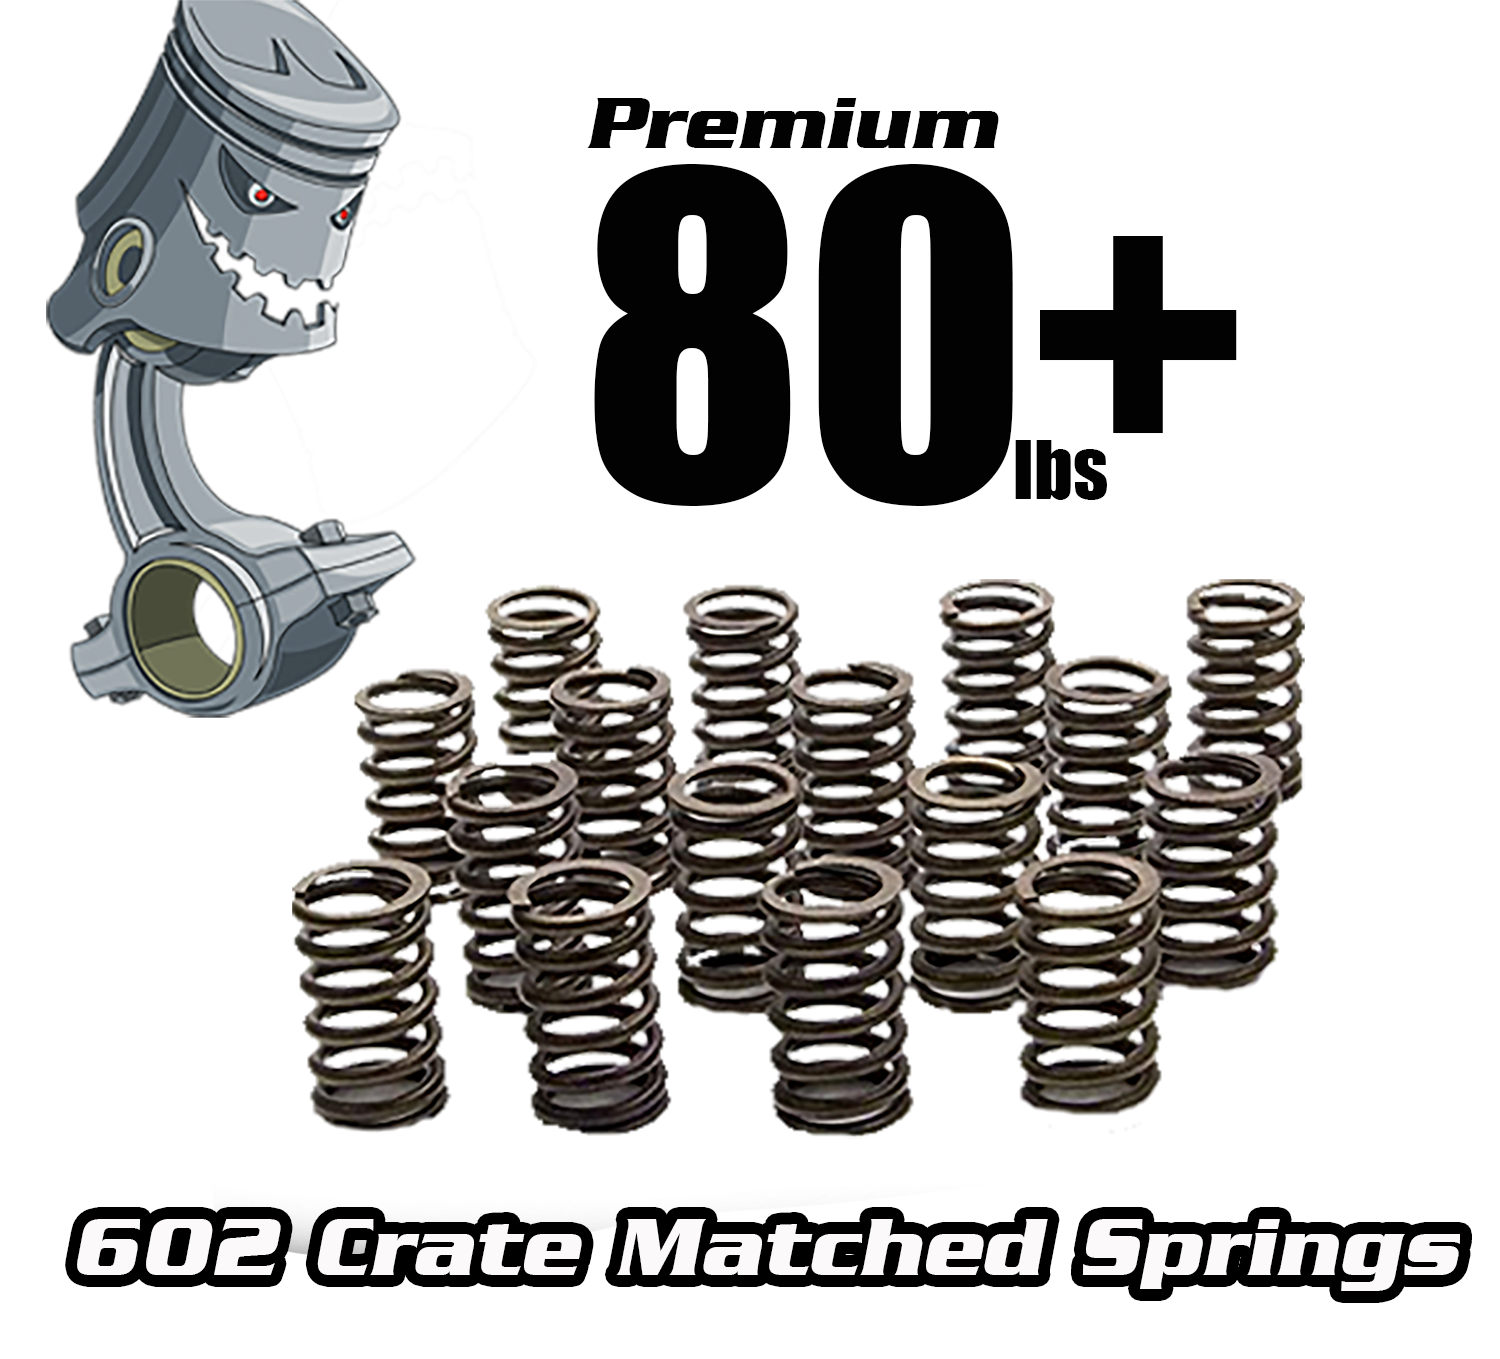 Premium 80lb Matched Valve Springs for 602 Crate